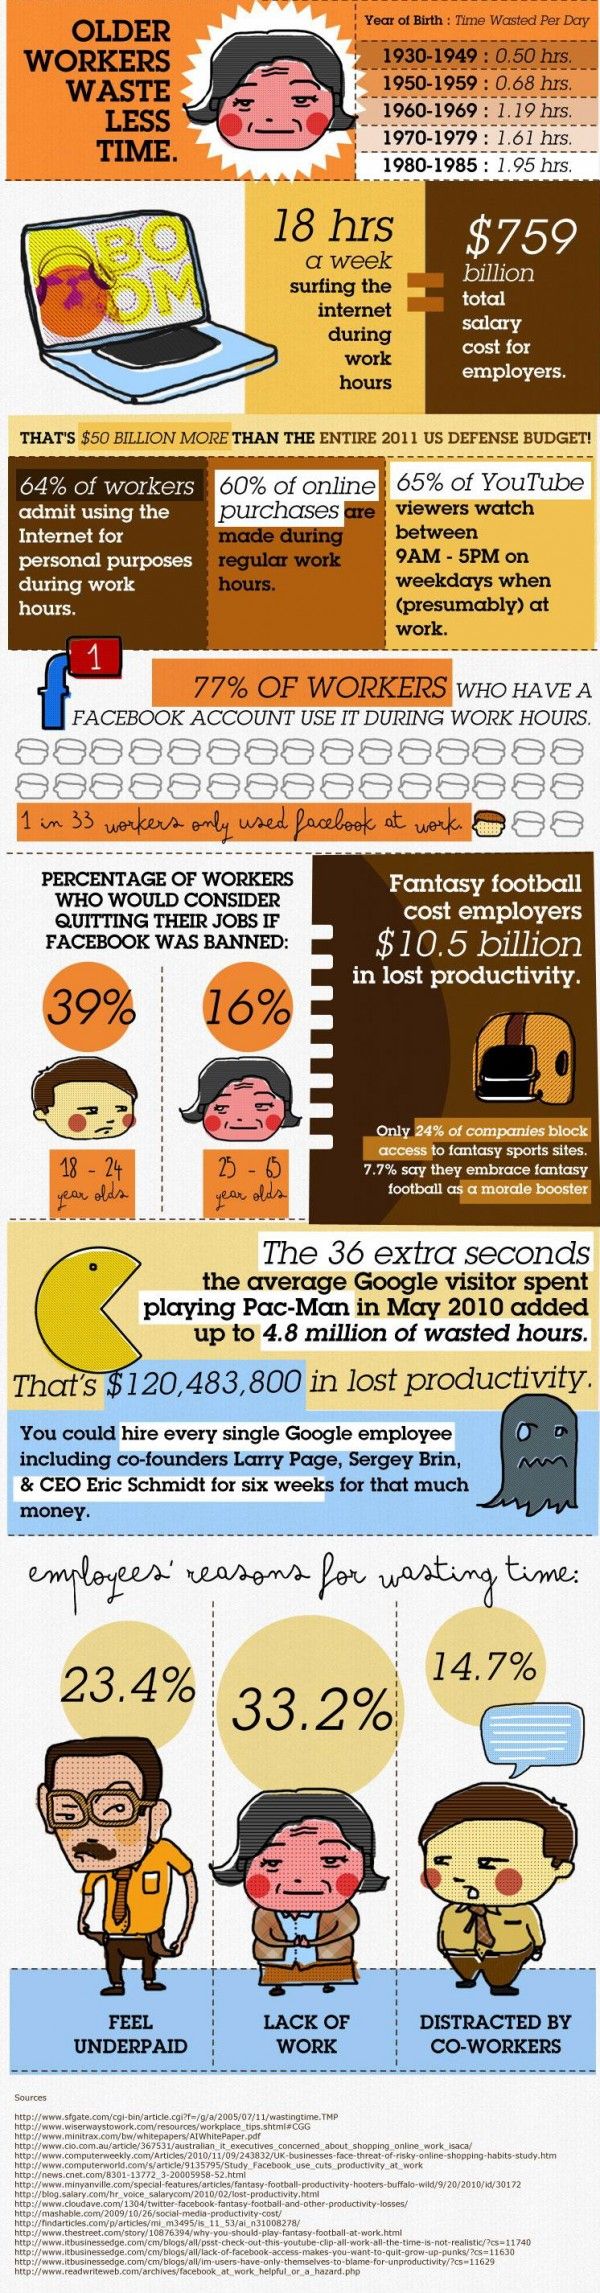 older-workers-business-infographic1-600x2293